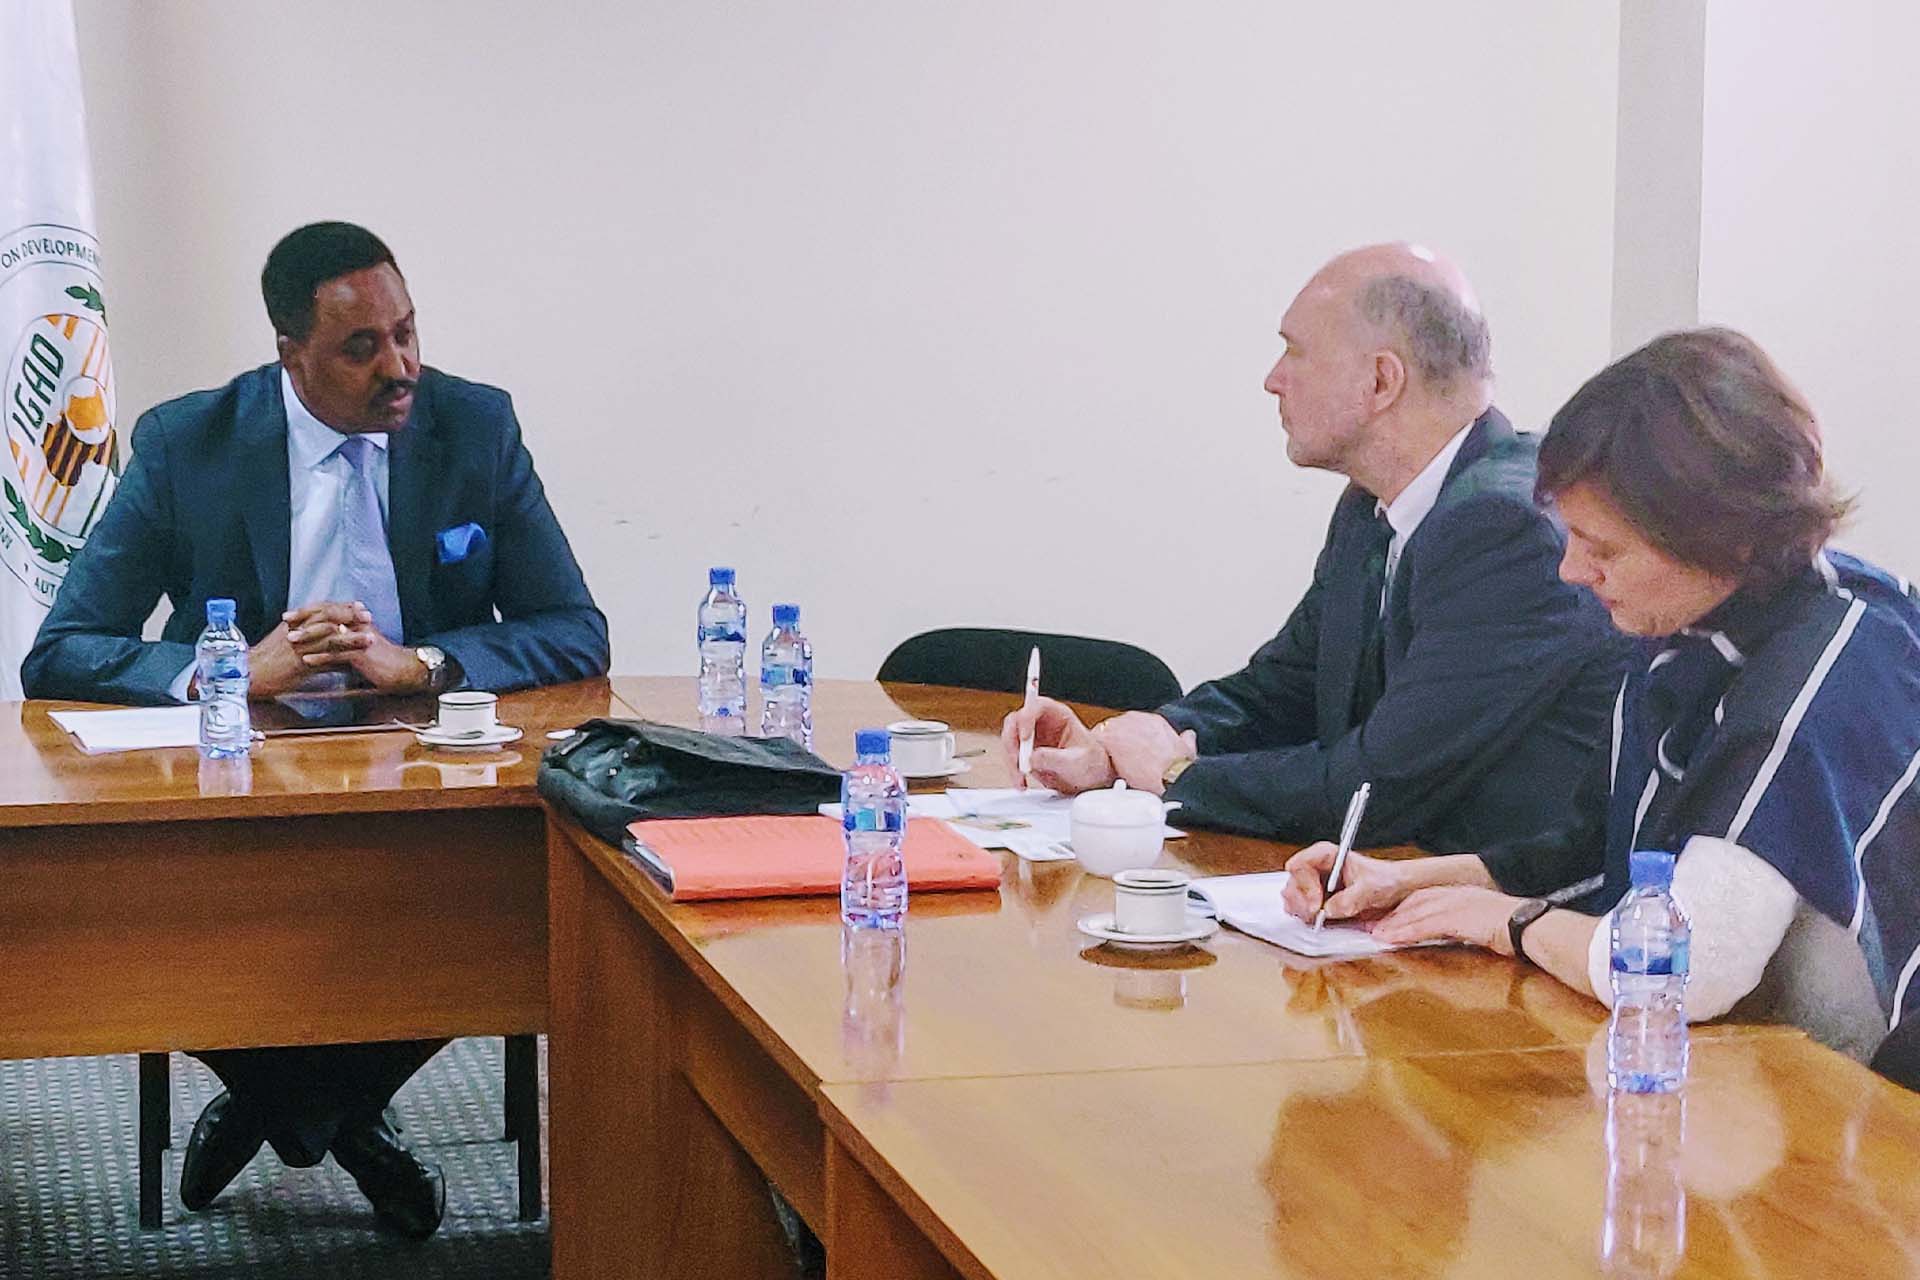 IGAD CHIEF AND BMZ OFFICIALS DISCUSS PARTNERSHIP, SUPPORT AND ENHANCEMENT TOWARDS IMPLEMENTATION OF DEVELOPMENT ACTIVITIES IN THE IGAD REGION